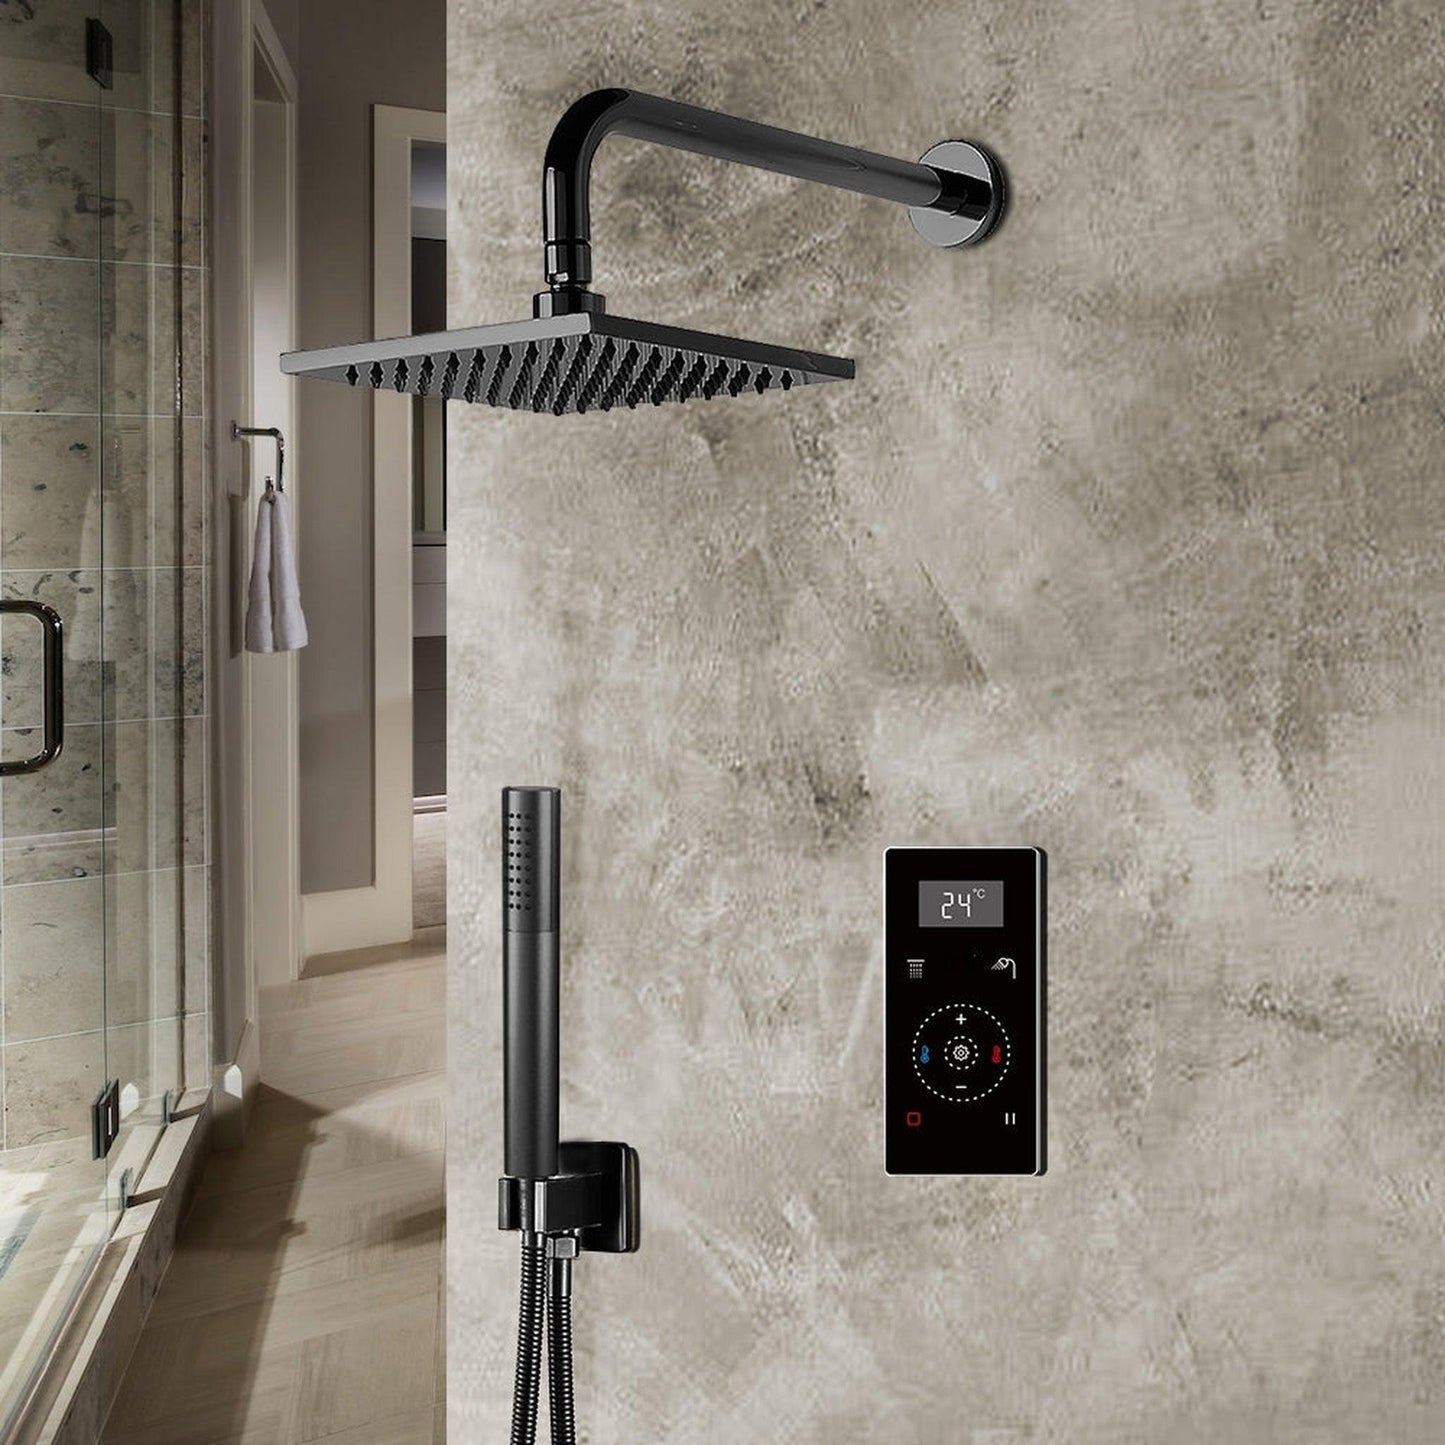 Fontana 10" Matte Black Square Wall-Mounted Automatic Thermostatic Shower With Black Digital Touch Screen Shower Mixer Display 2-Function Rainfall Shower Set With Hand Shower